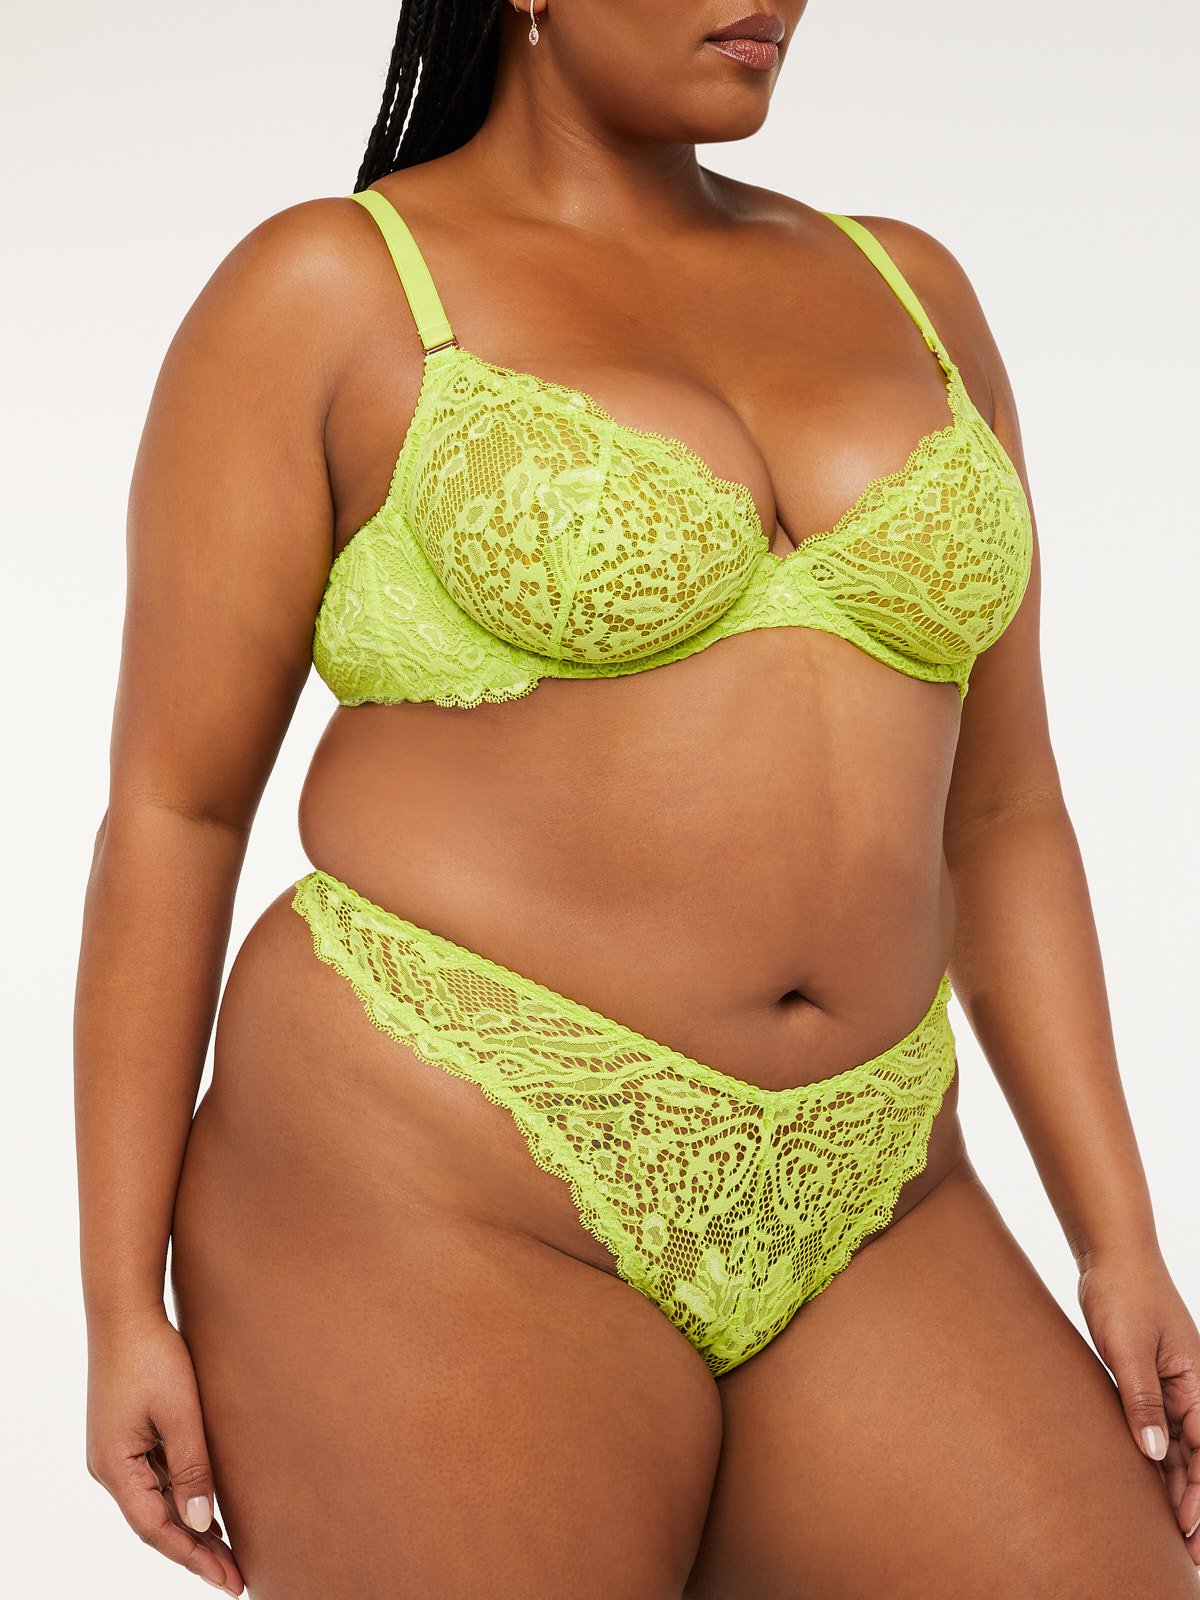 Candie's® Lace Cheeky Panty-Neon Green, Candie's panties ar…